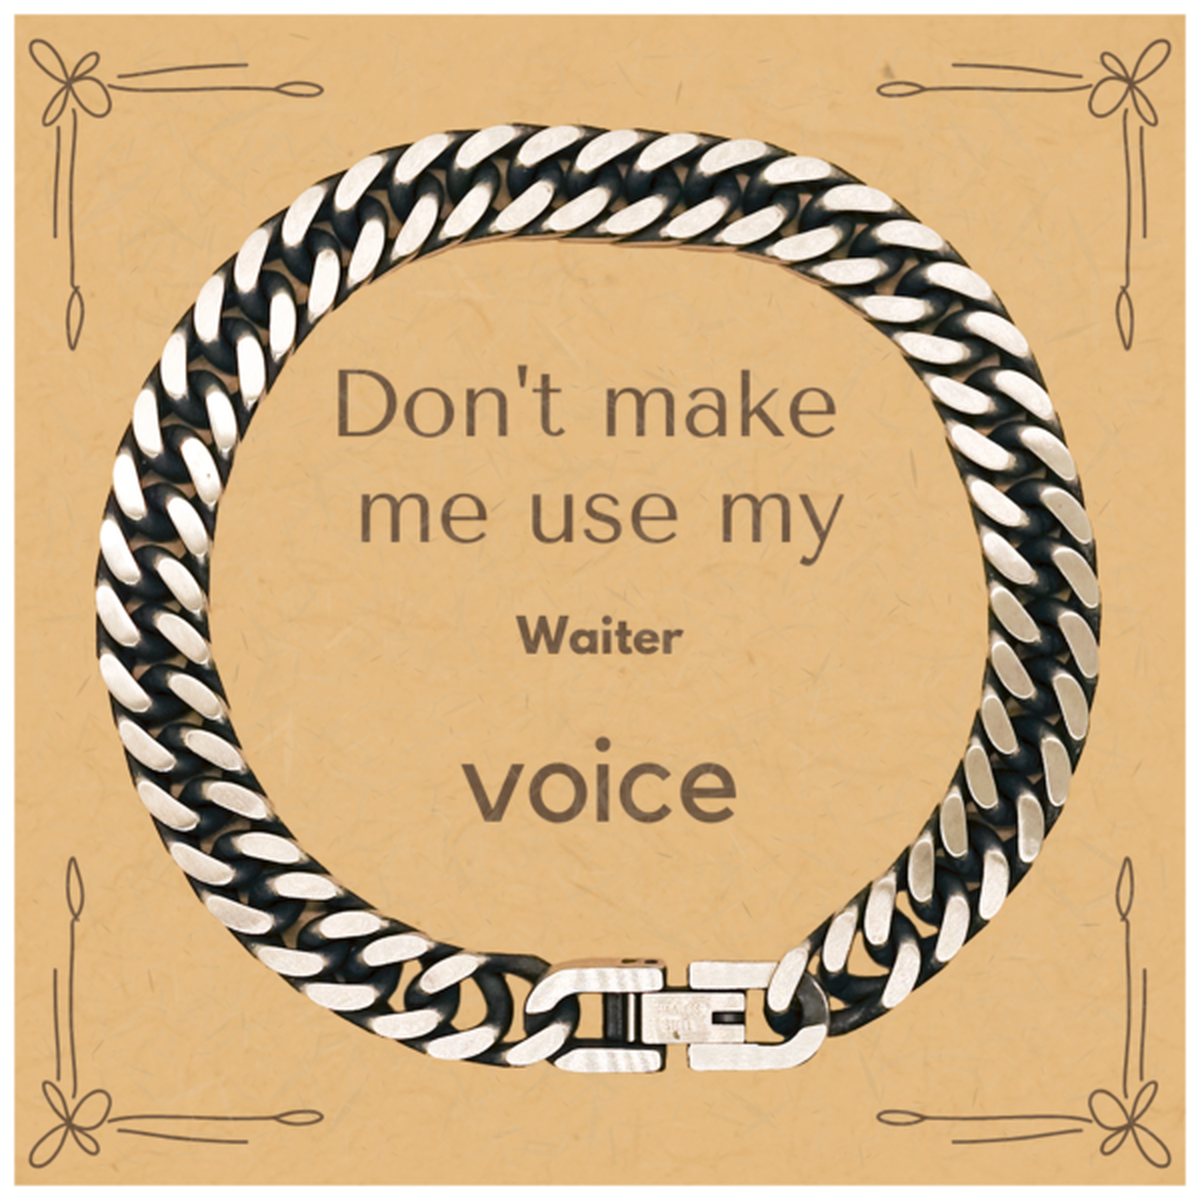 Don't make me use my Waiter voice, Sarcasm Waiter Card Gifts, Christmas Waiter Cuban Link Chain Bracelet Birthday Unique Gifts For Waiter Coworkers, Men, Women, Colleague, Friends